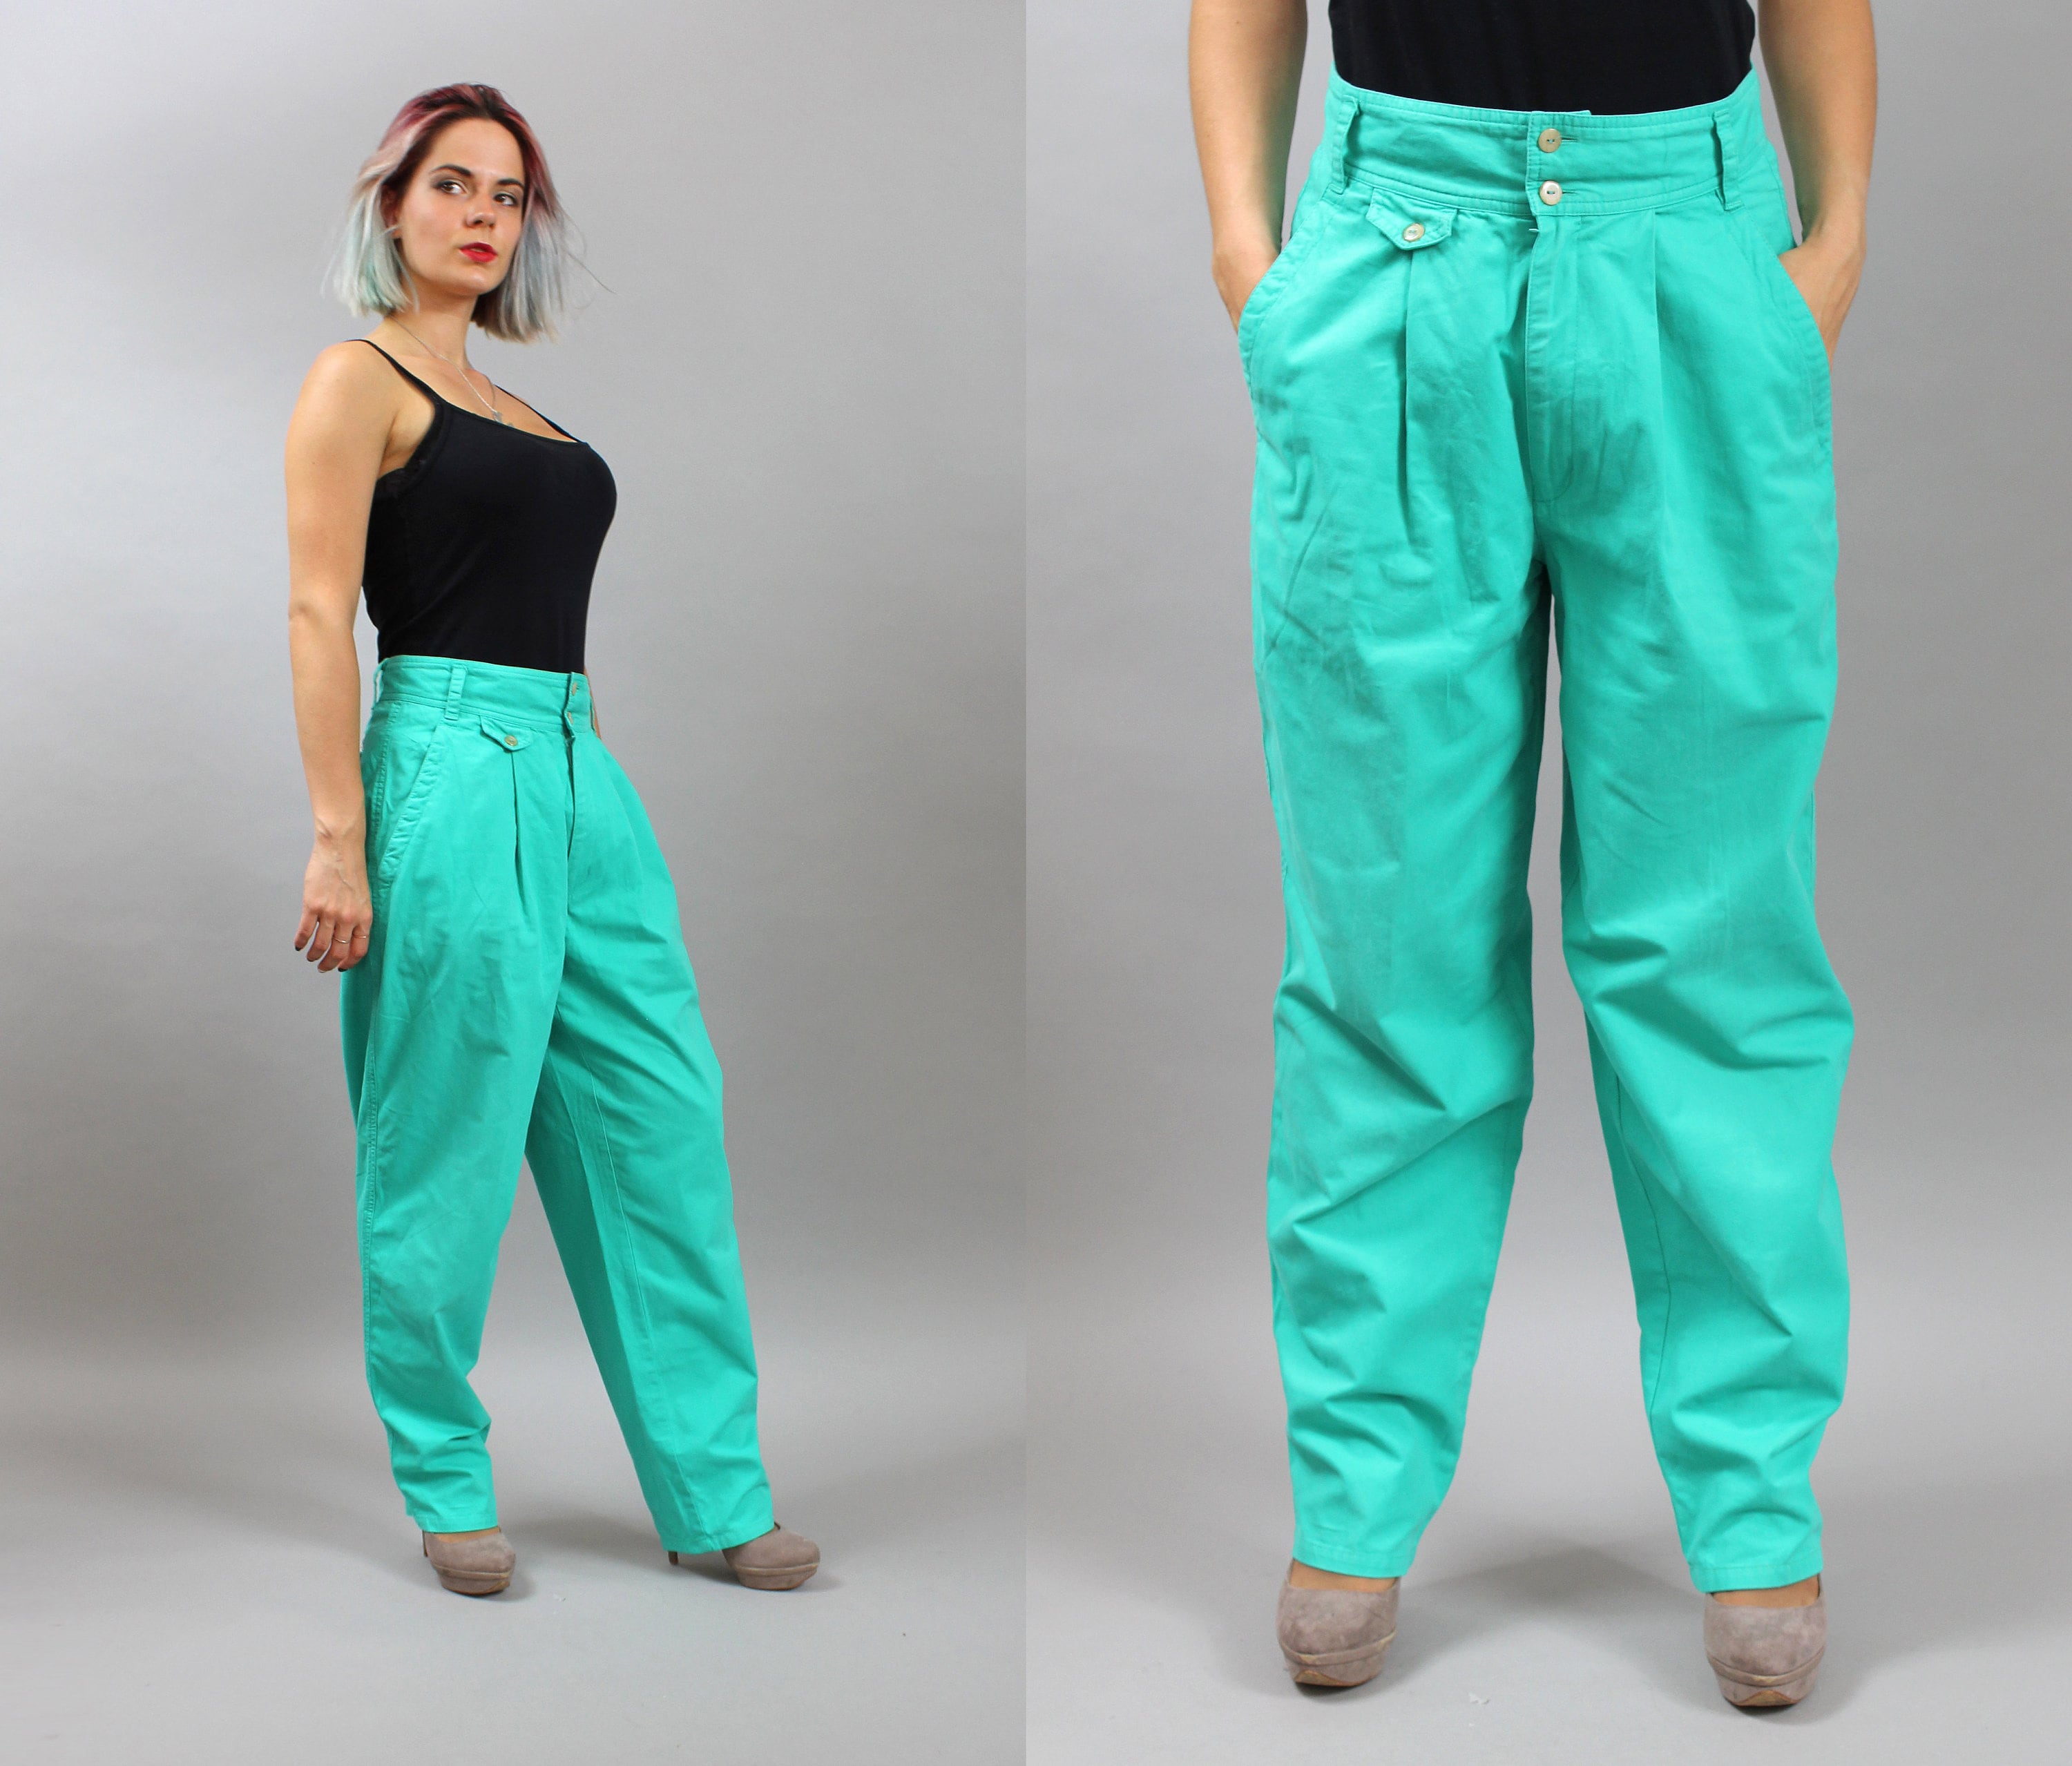 Vintage 80s Baggy High Waist Green Pants. Tapered Retro Moms Baggy Draped  Casual Trousers. Medium M 